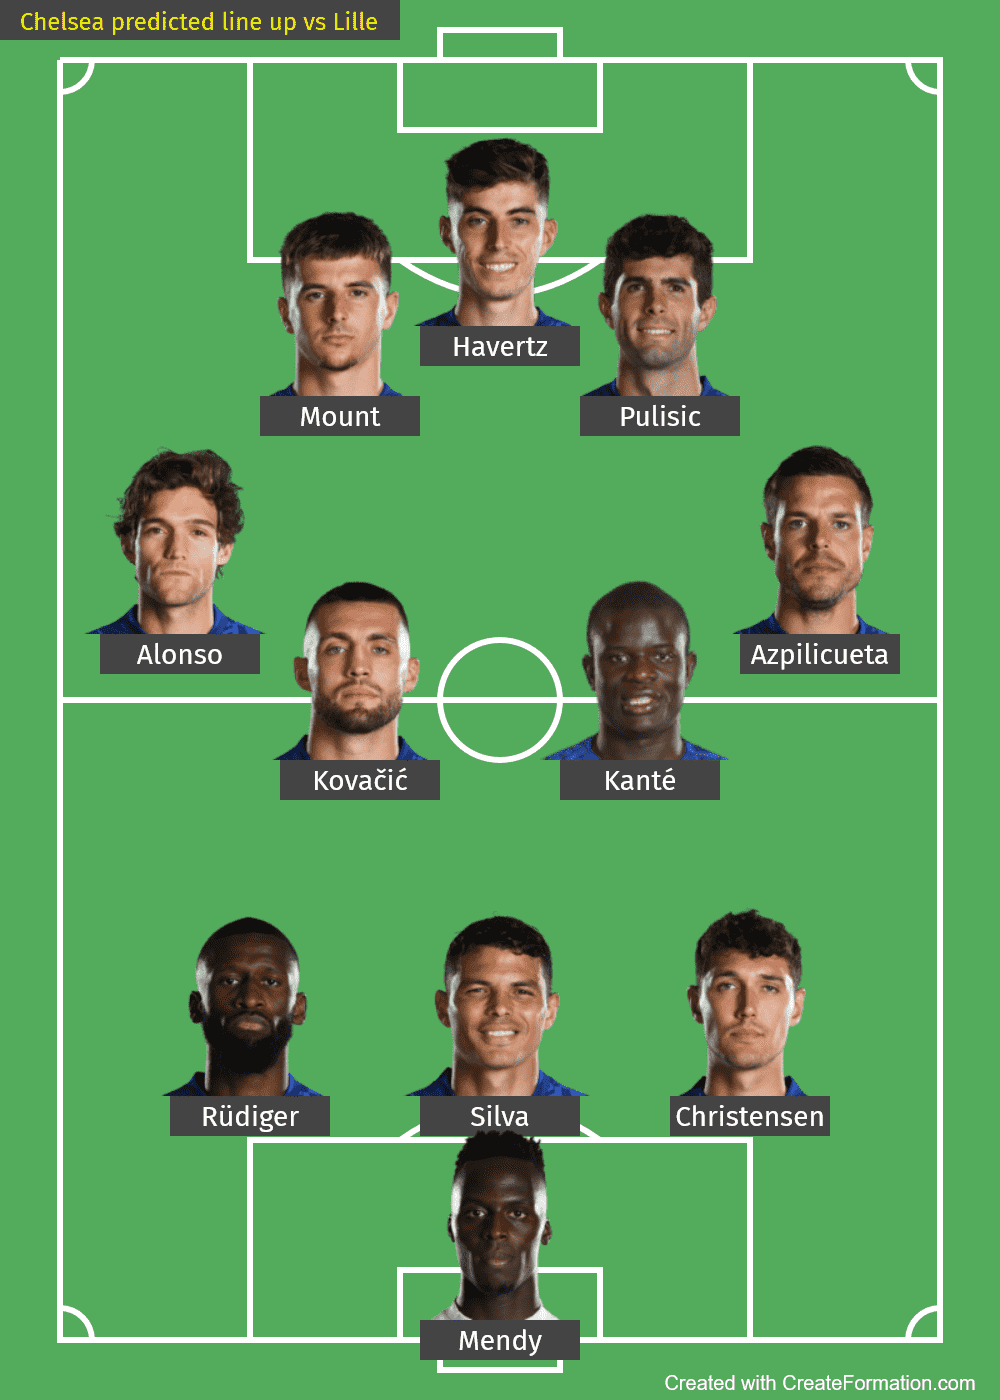 Chelsea predicted line up vs Lille-2nd leg-UCL